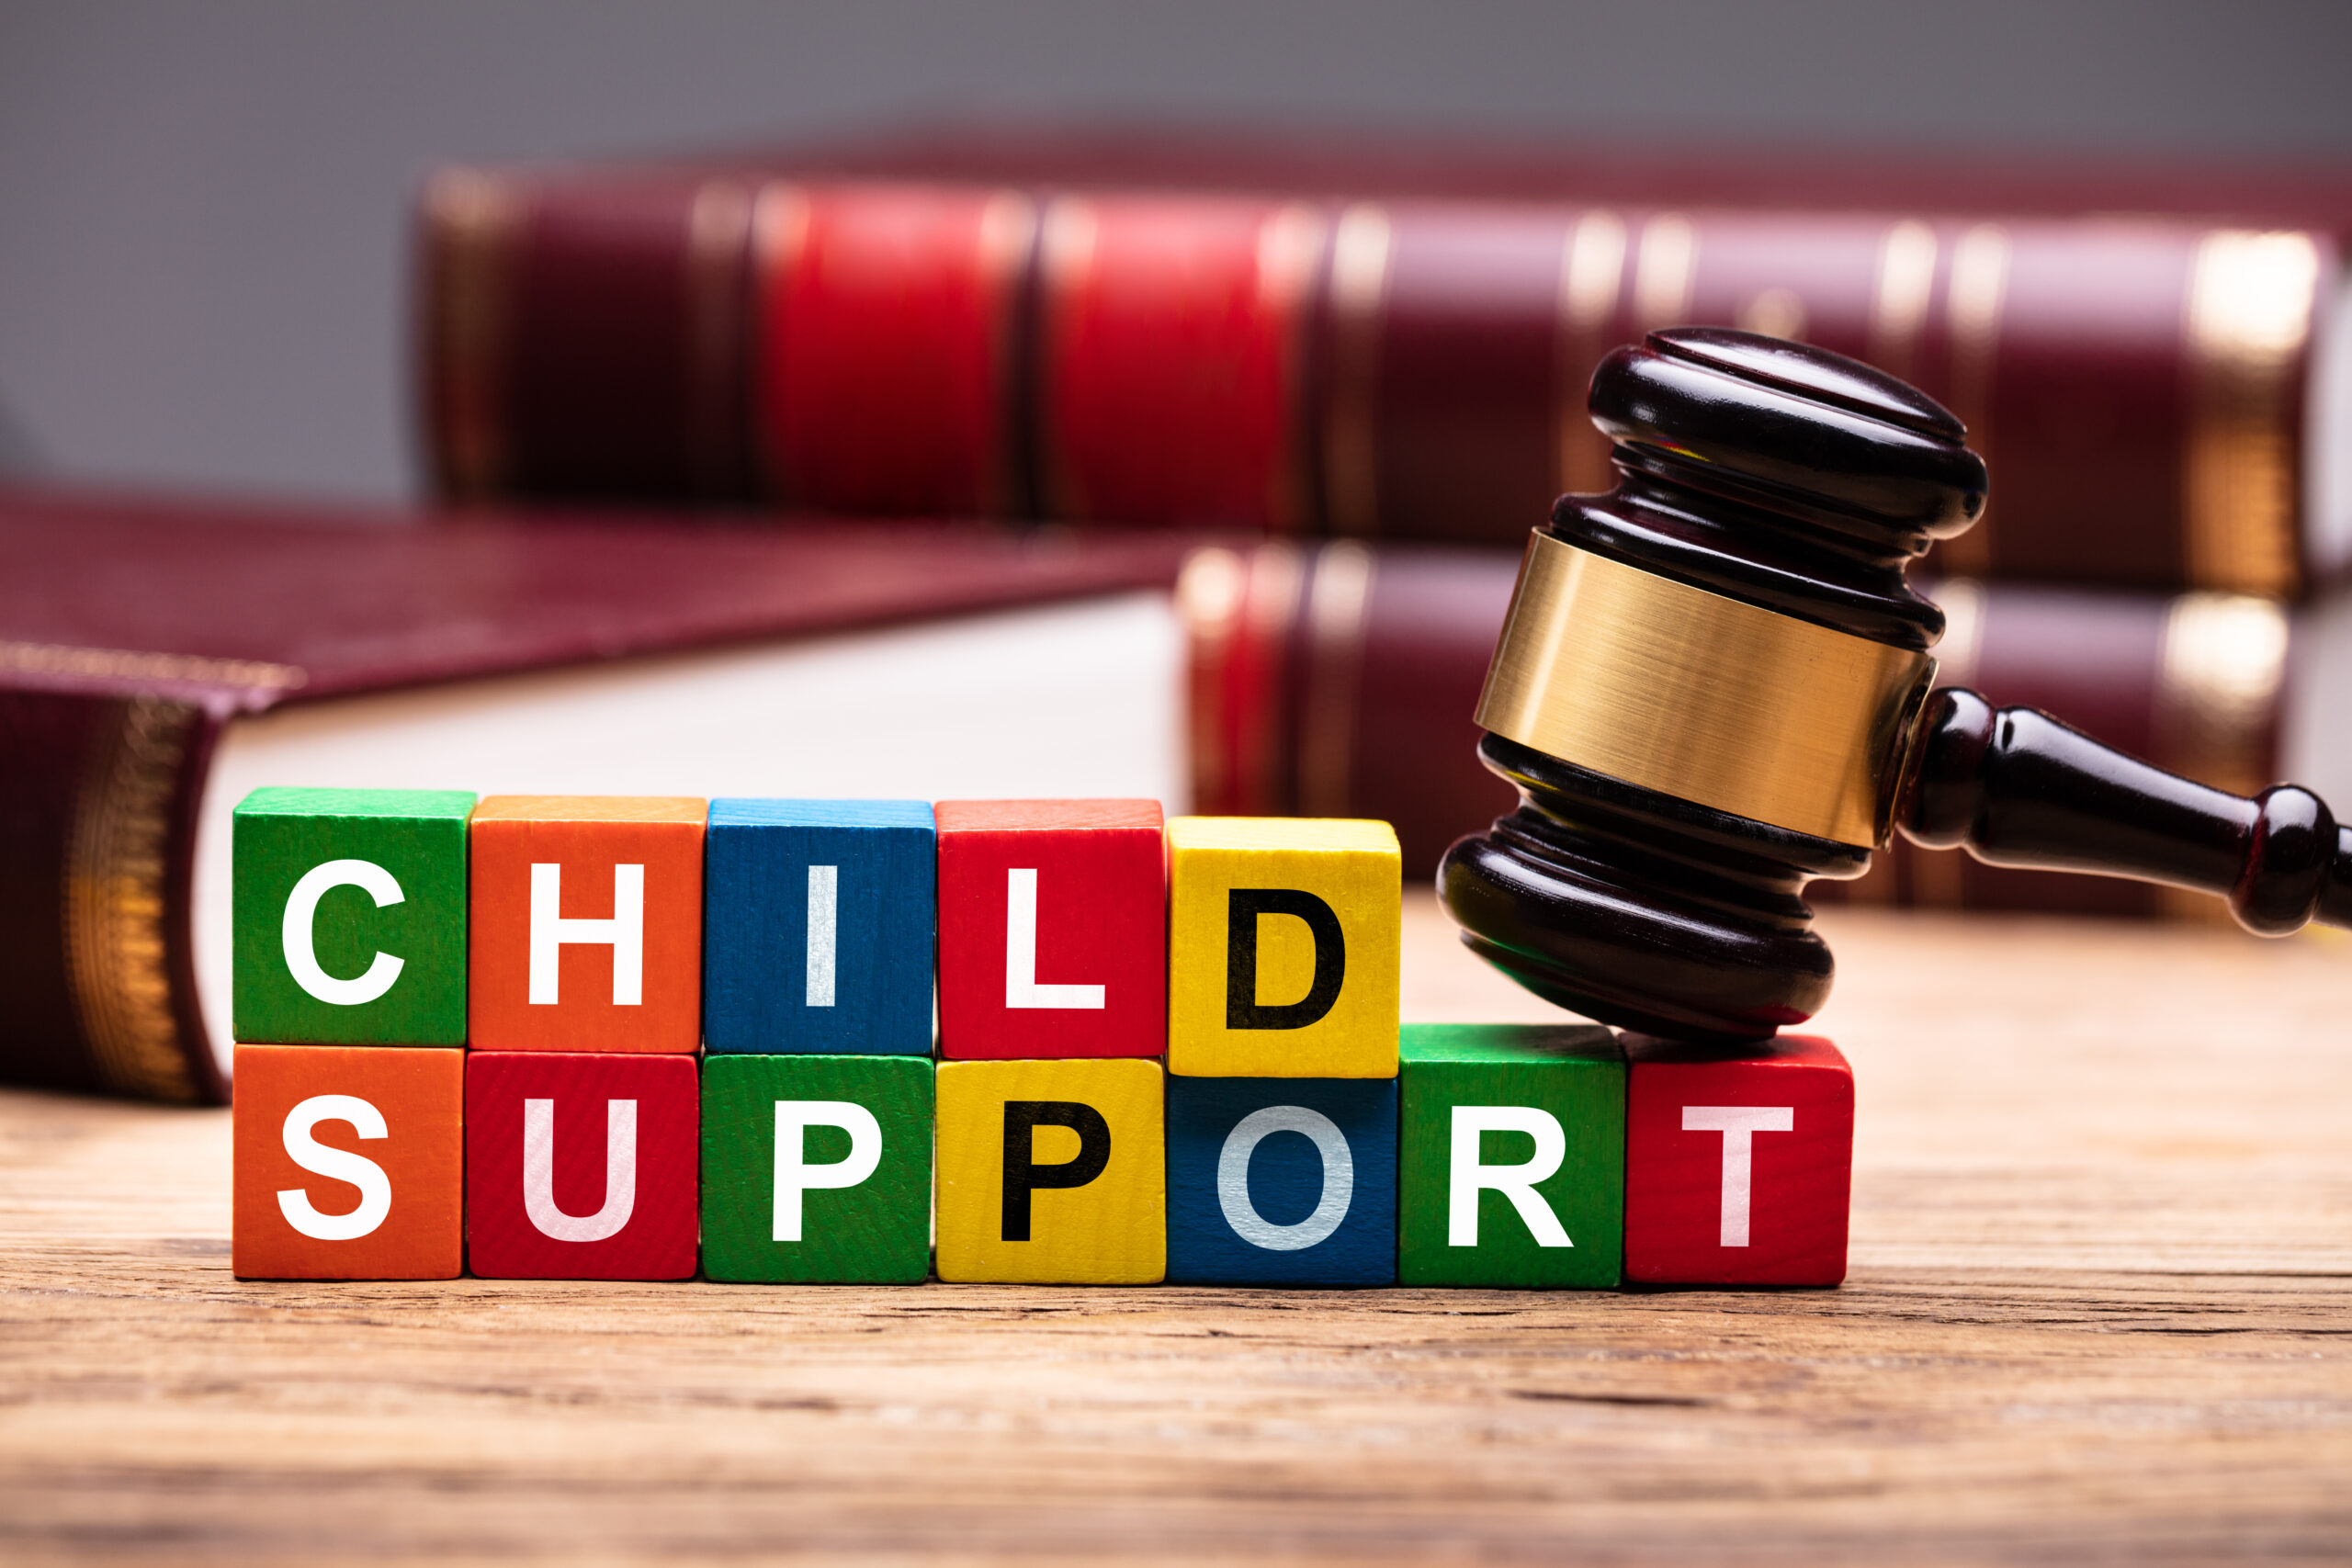 Child Support Colorful Block With Bible And Hammer Over Wooden Desk In Courtroom